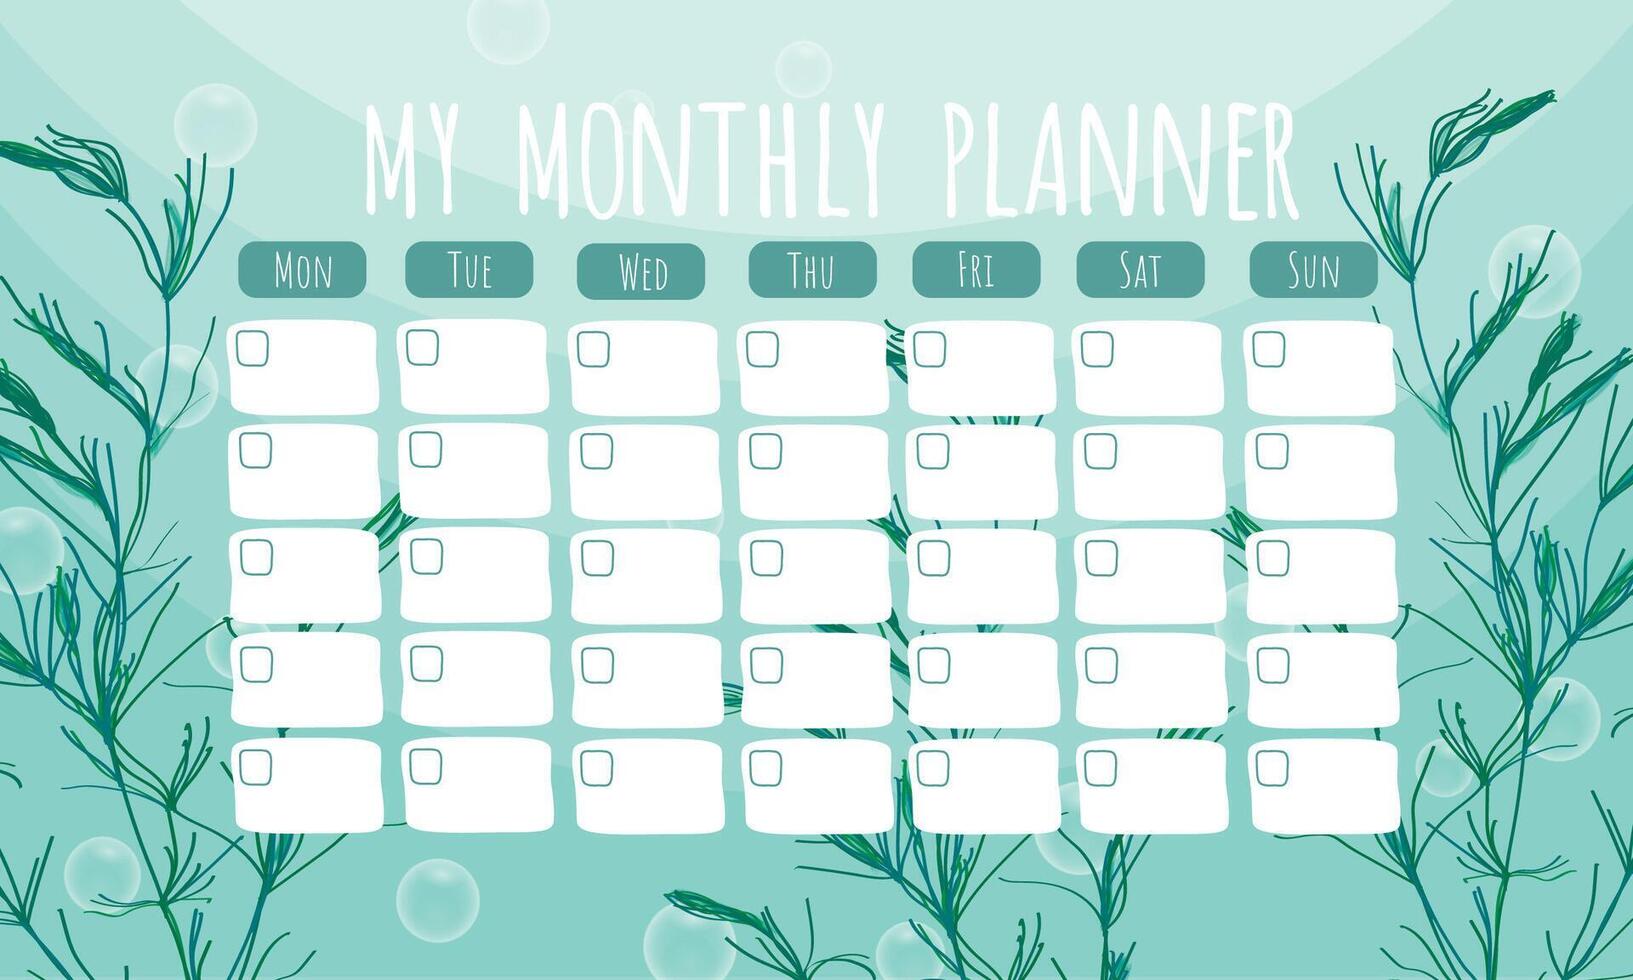 Marine life monthly planner schedule with seaweeds.  Vector stationary template